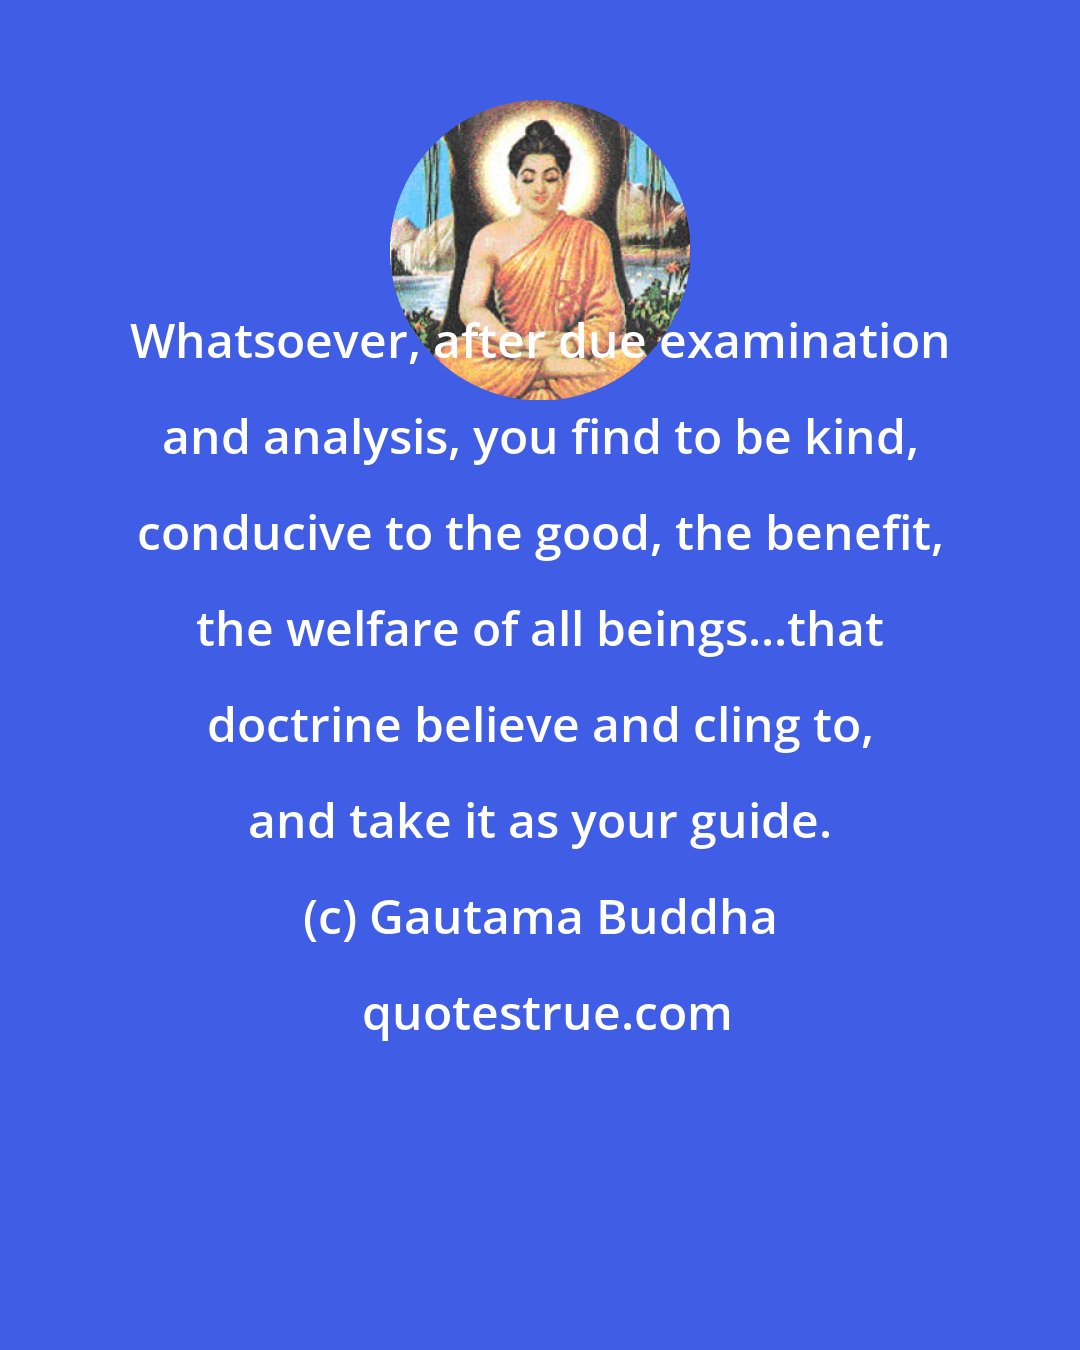 Gautama Buddha: Whatsoever, after due examination and analysis, you find to be kind, conducive to the good, the benefit, the welfare of all beings...that doctrine believe and cling to, and take it as your guide.